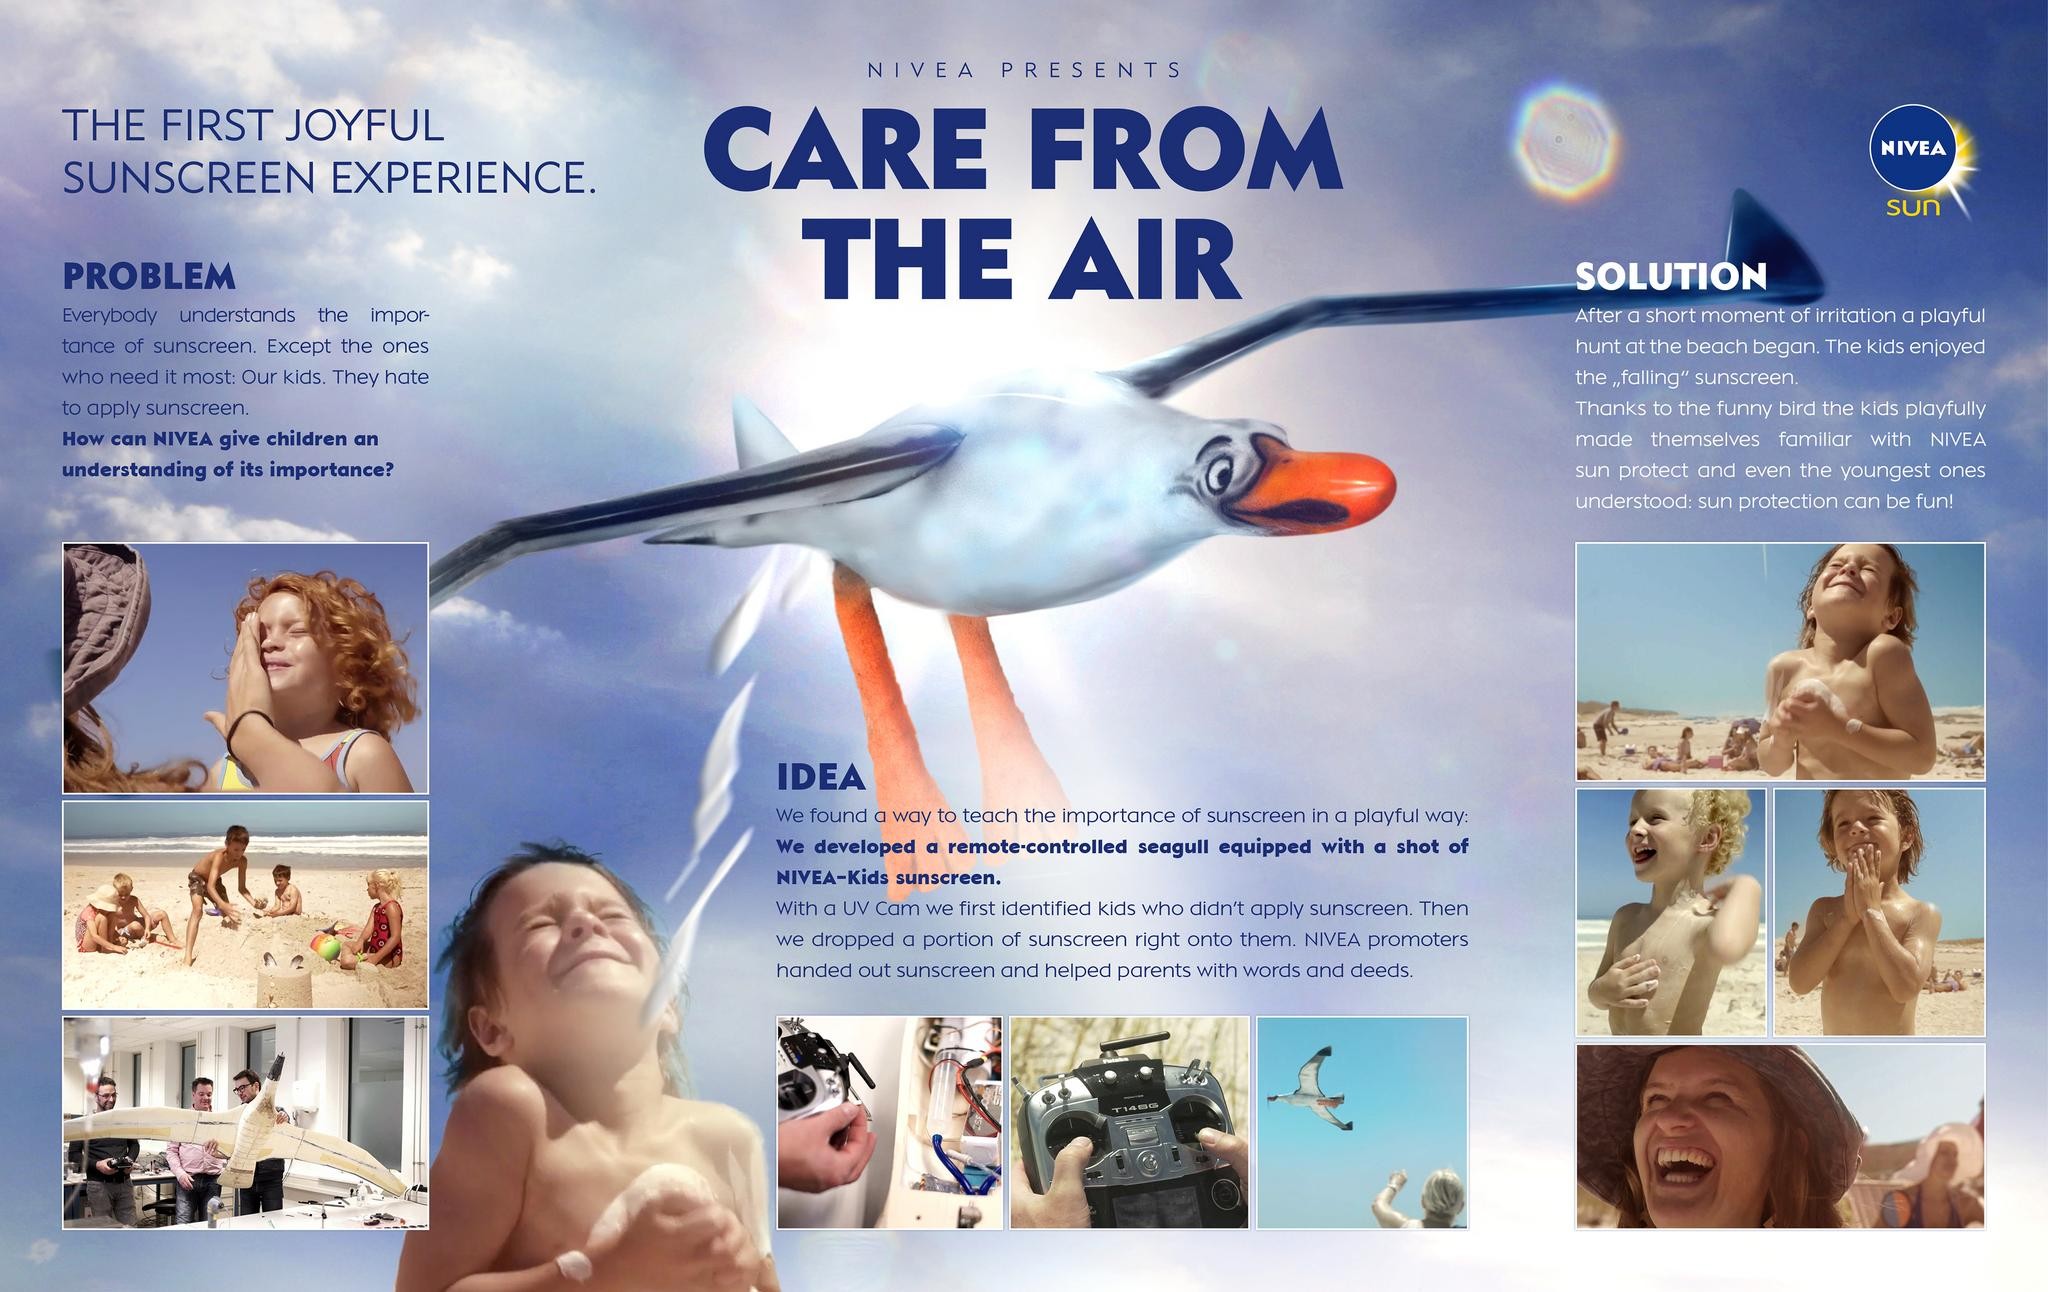 NIVEA - "Care from the Air"